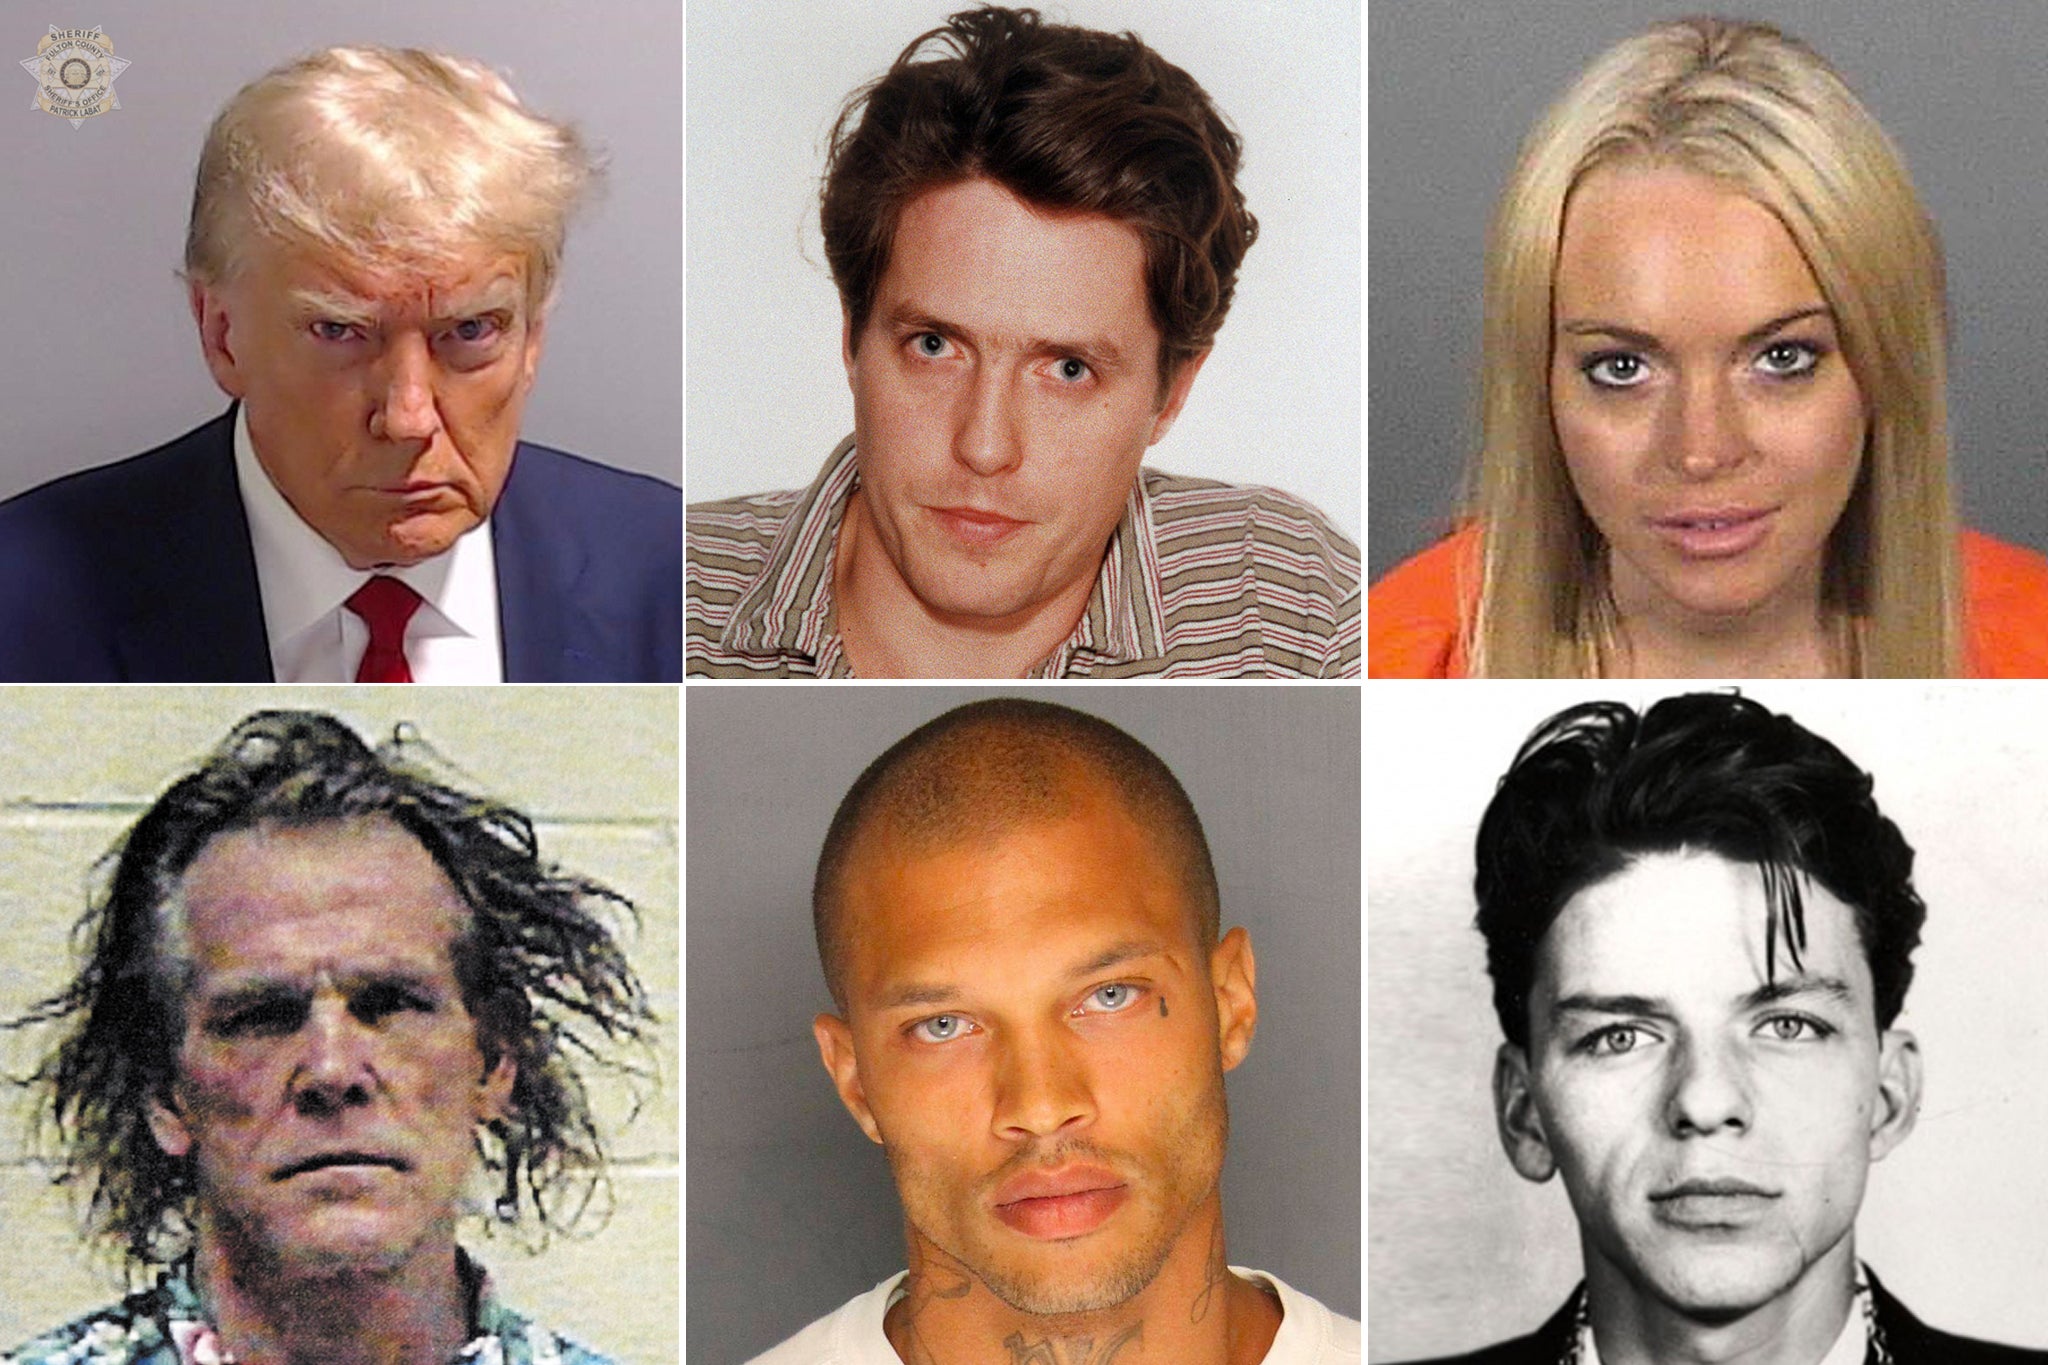 With one glowering mug shot, Trump joins a notorious album of (alleged) criminals The Independent picture